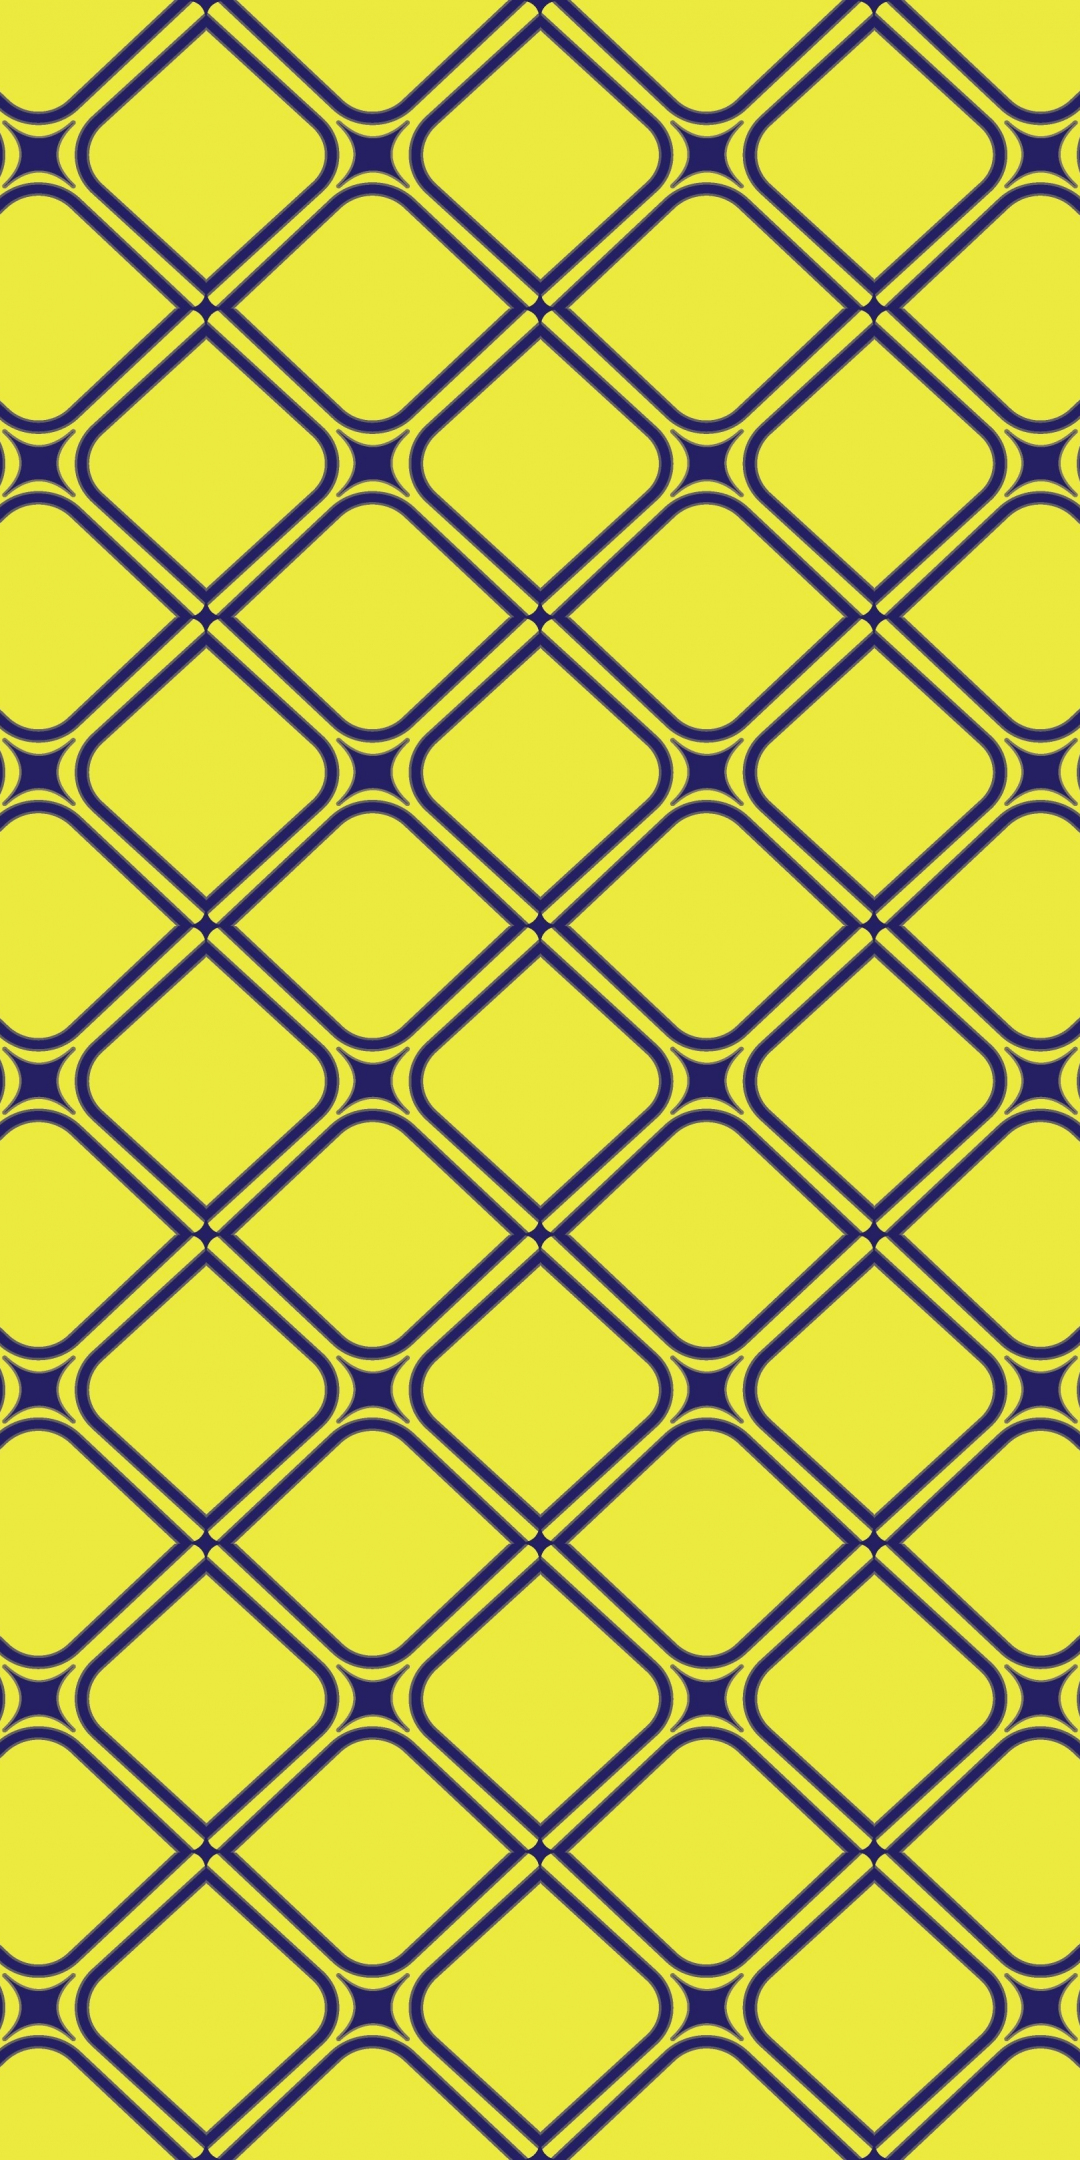 Texture, squares, pattern, abstract, 1080x2160 wallpaper